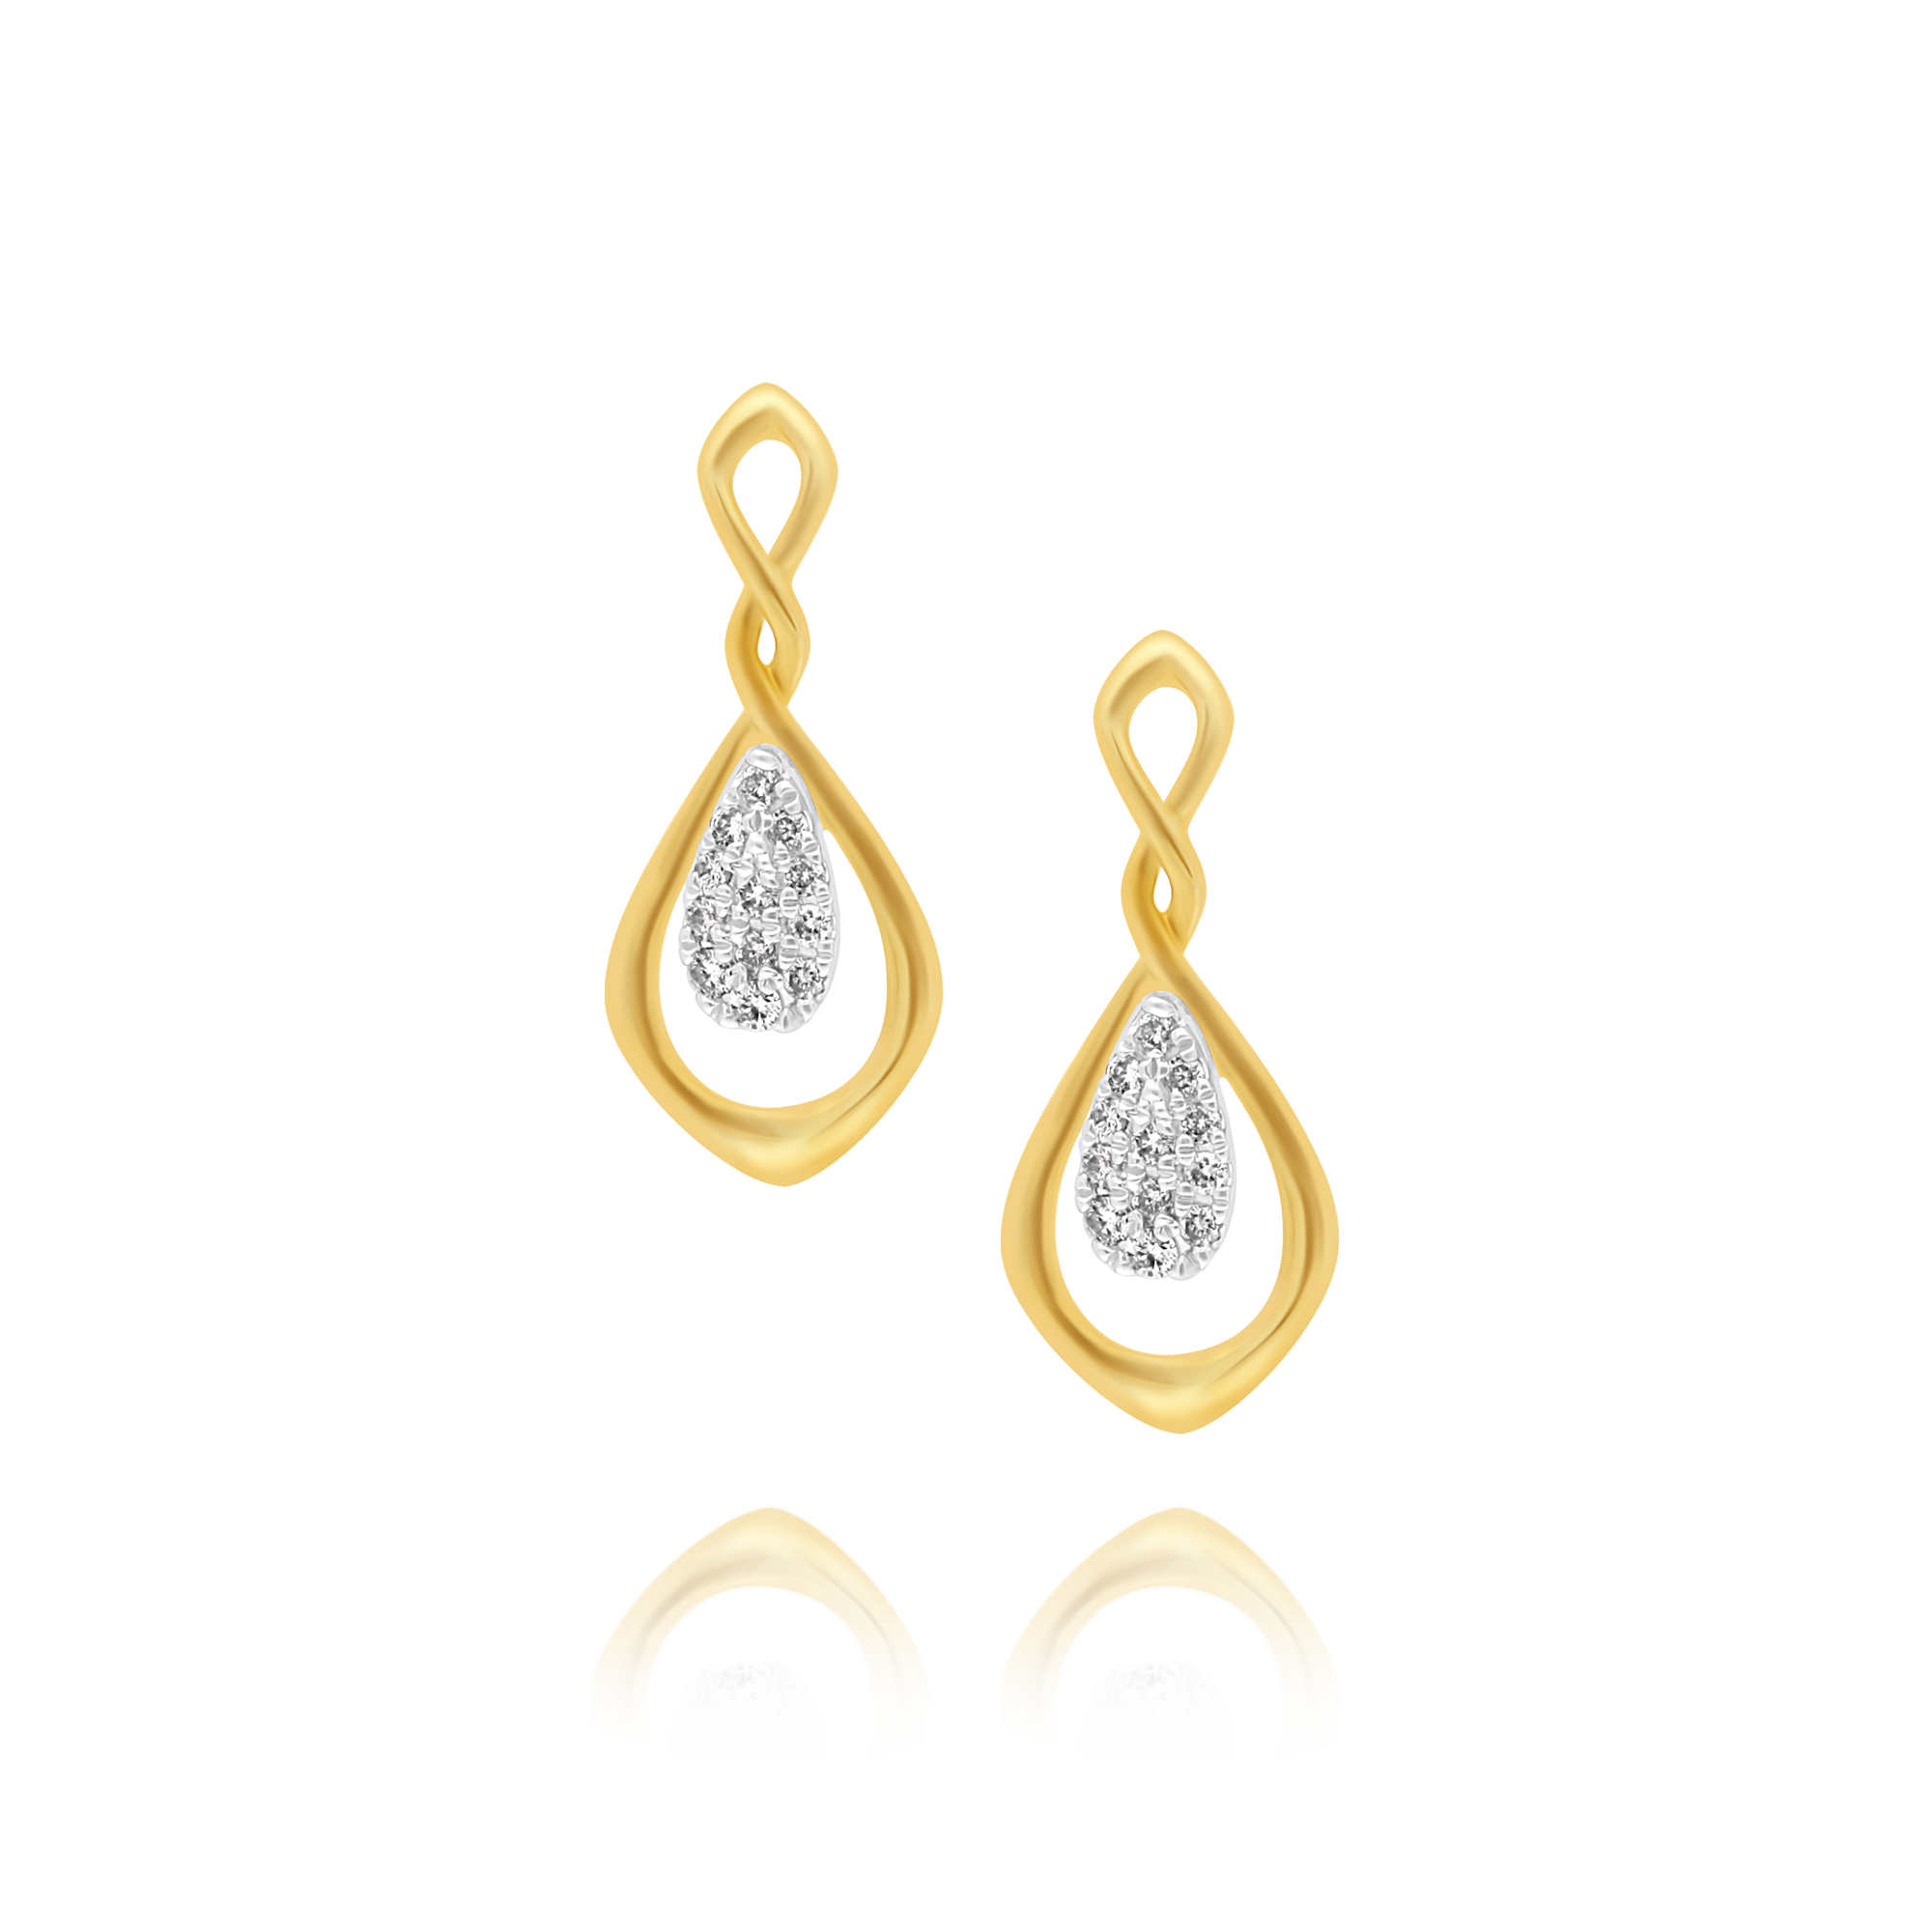 Gold and Diamond Earrings with Small Drop